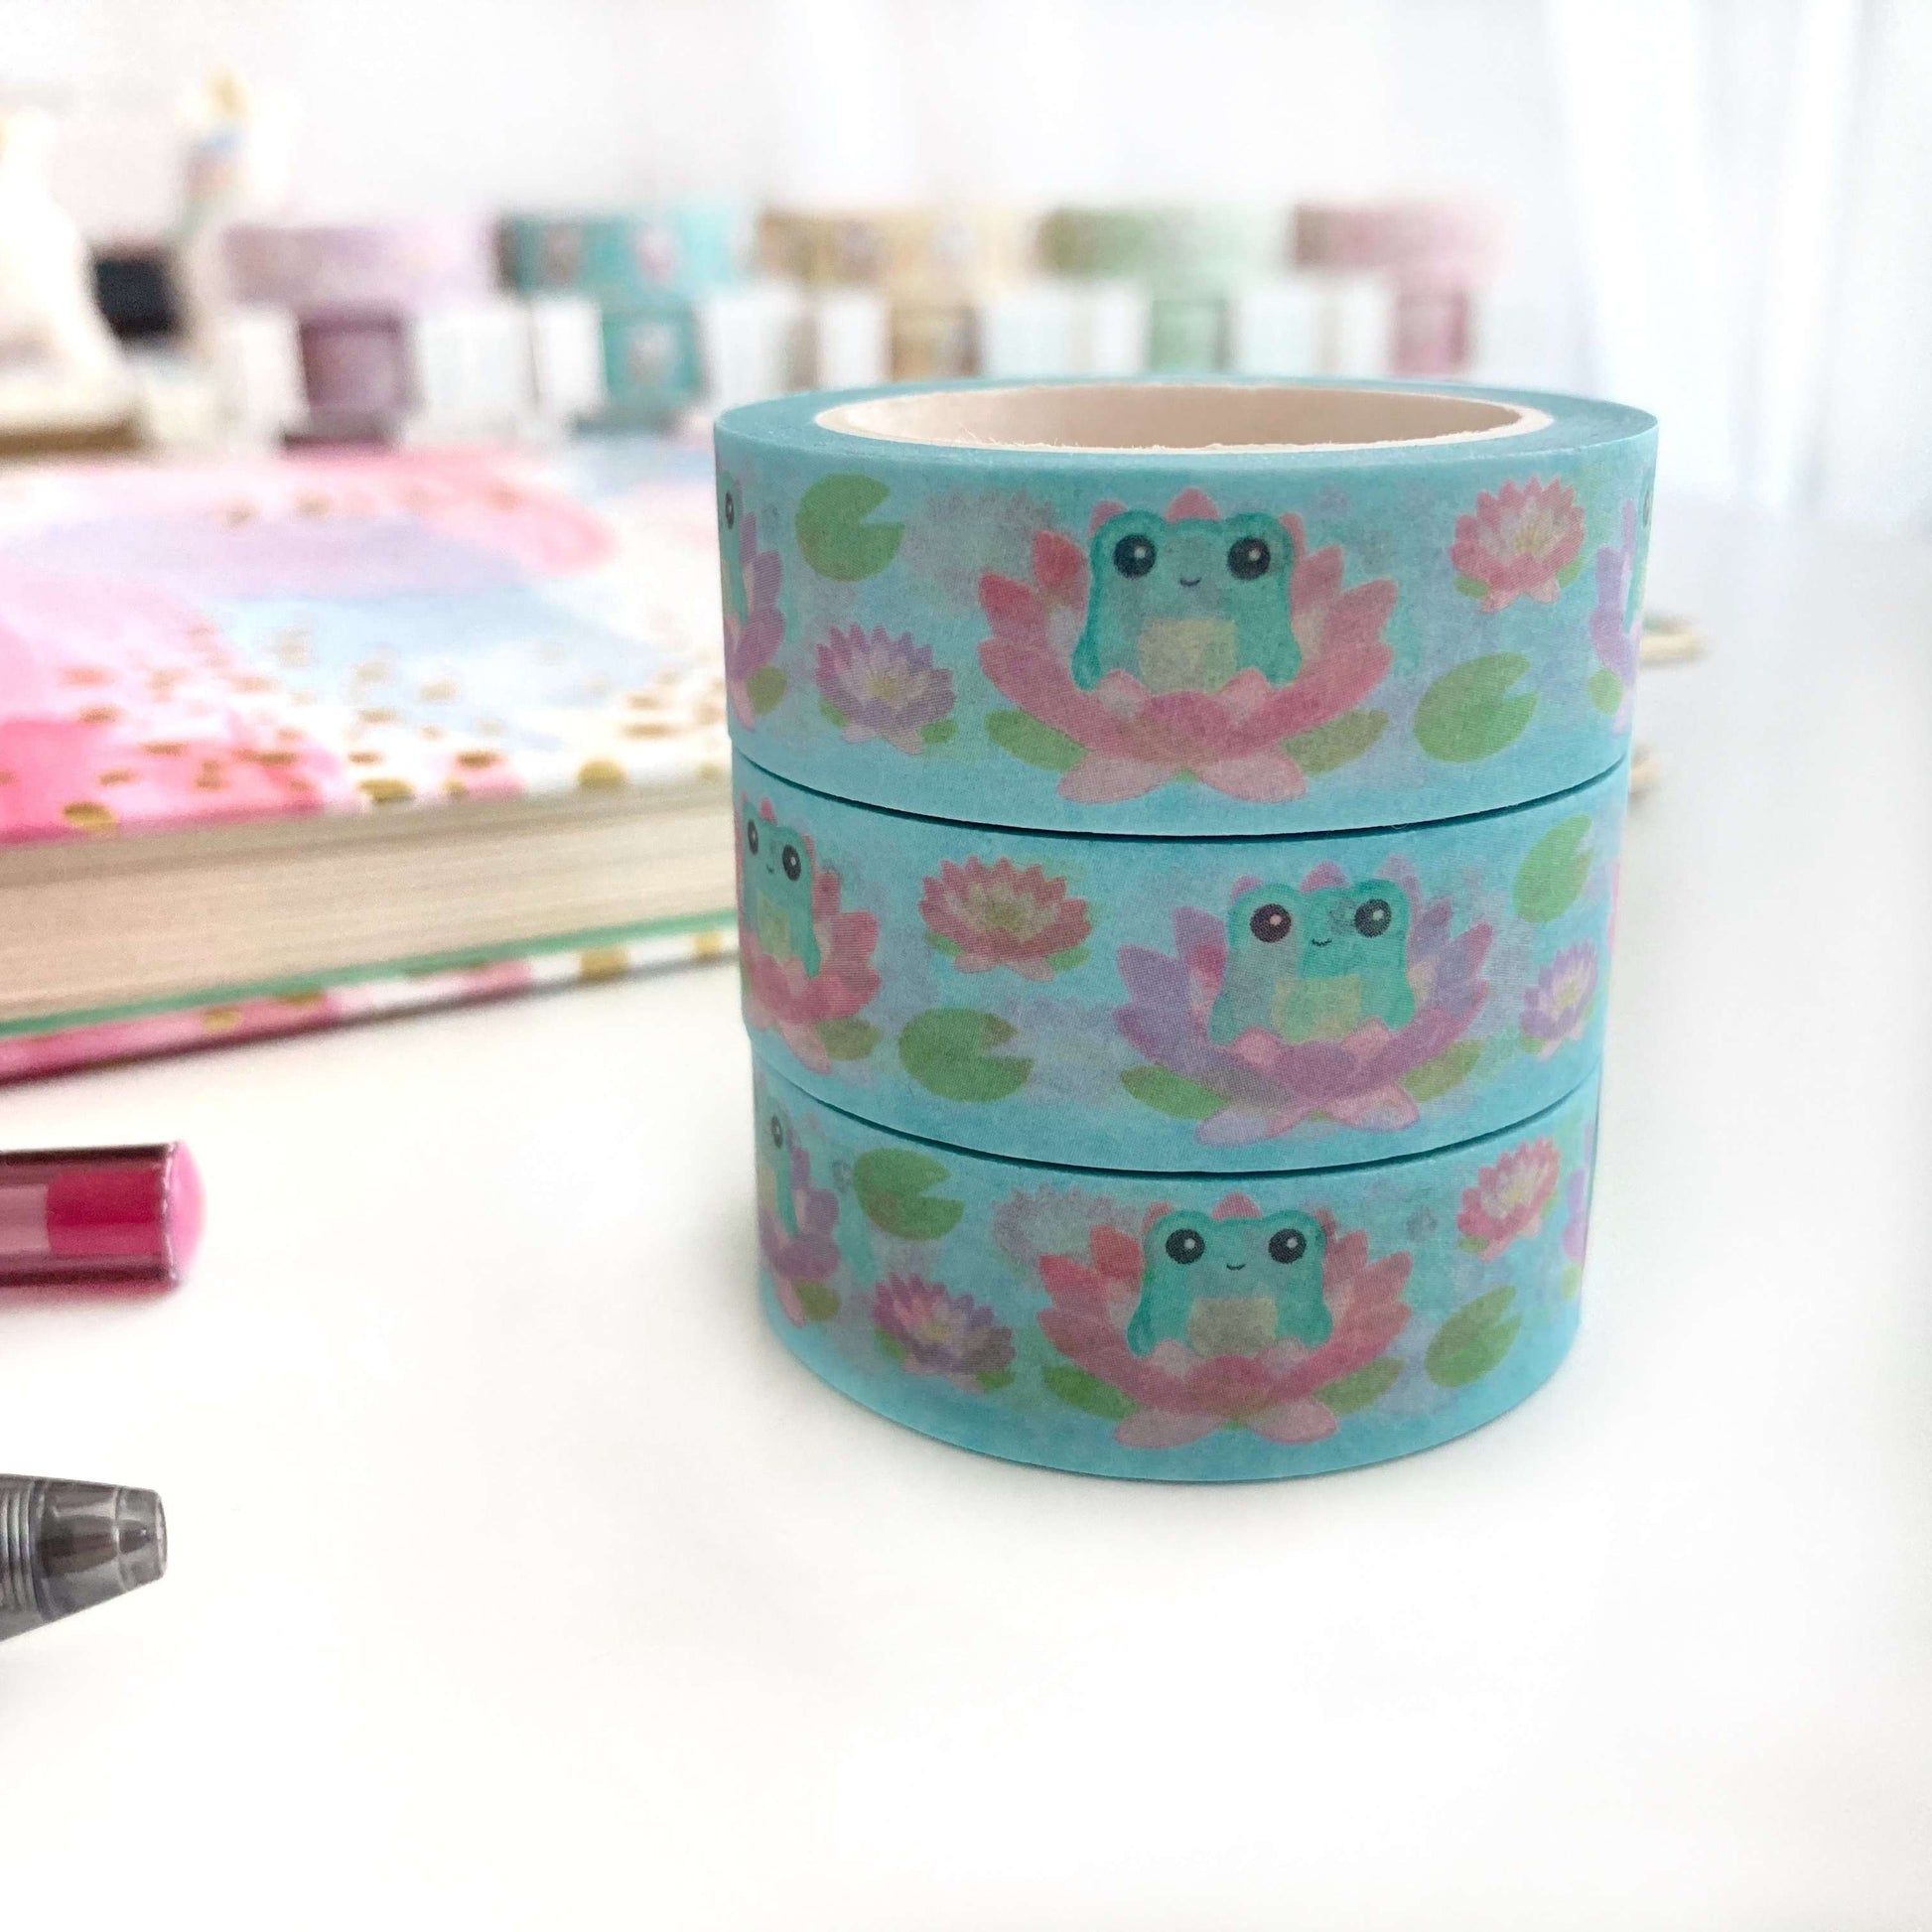 Lotus Flower Frog Washi Tape - Frog Bujo Tape - Frog Stationery - Scrapbooking Ideas by Wild Whimsy Woolies